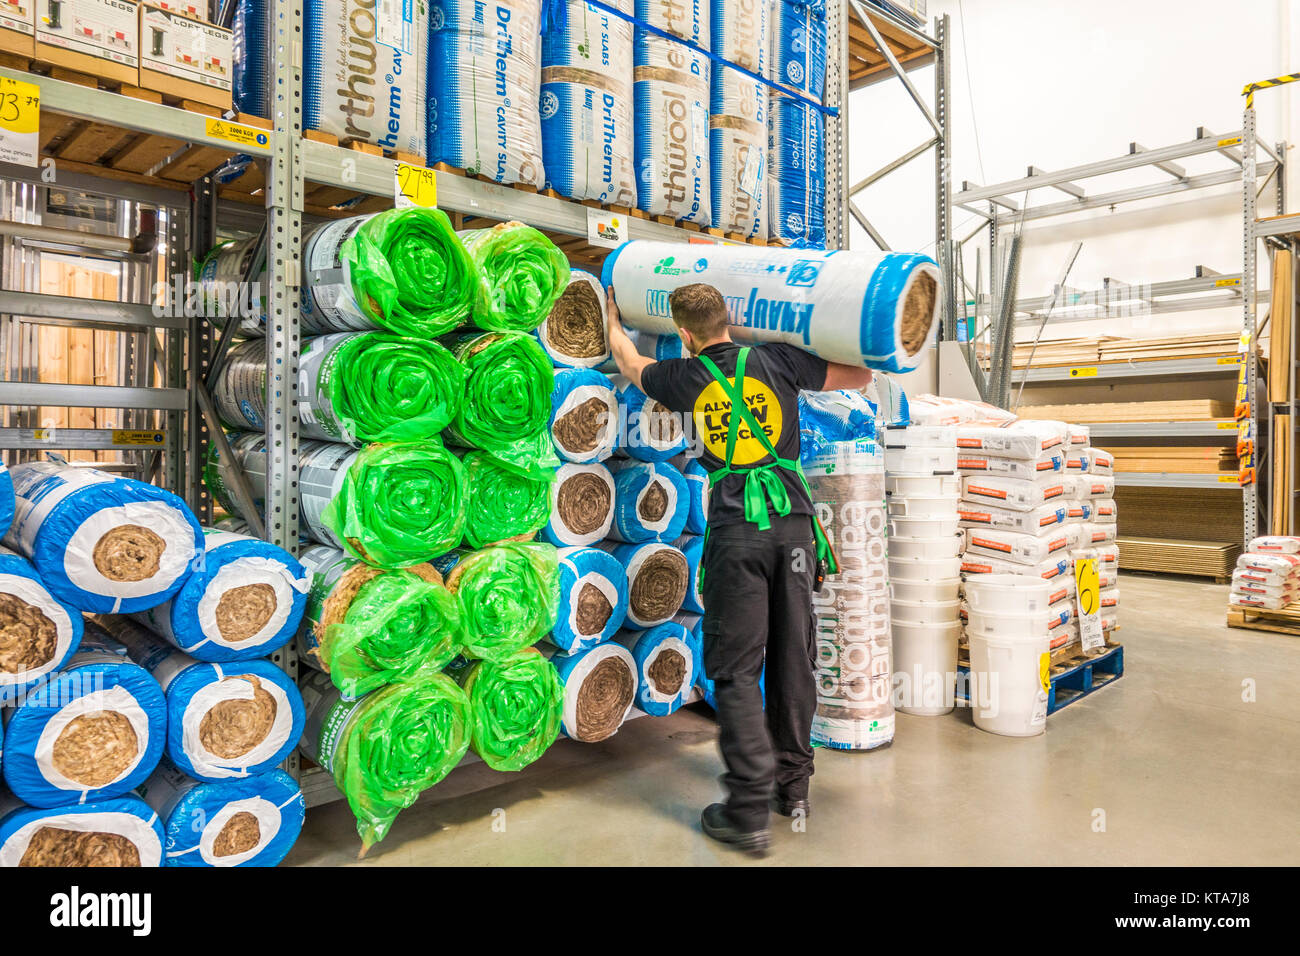 Young male employee standing and holding a large roll of Knauf insulation, placing it on a rack, in a Homebase DIY store. Stamford, England, UK. Stock Photo